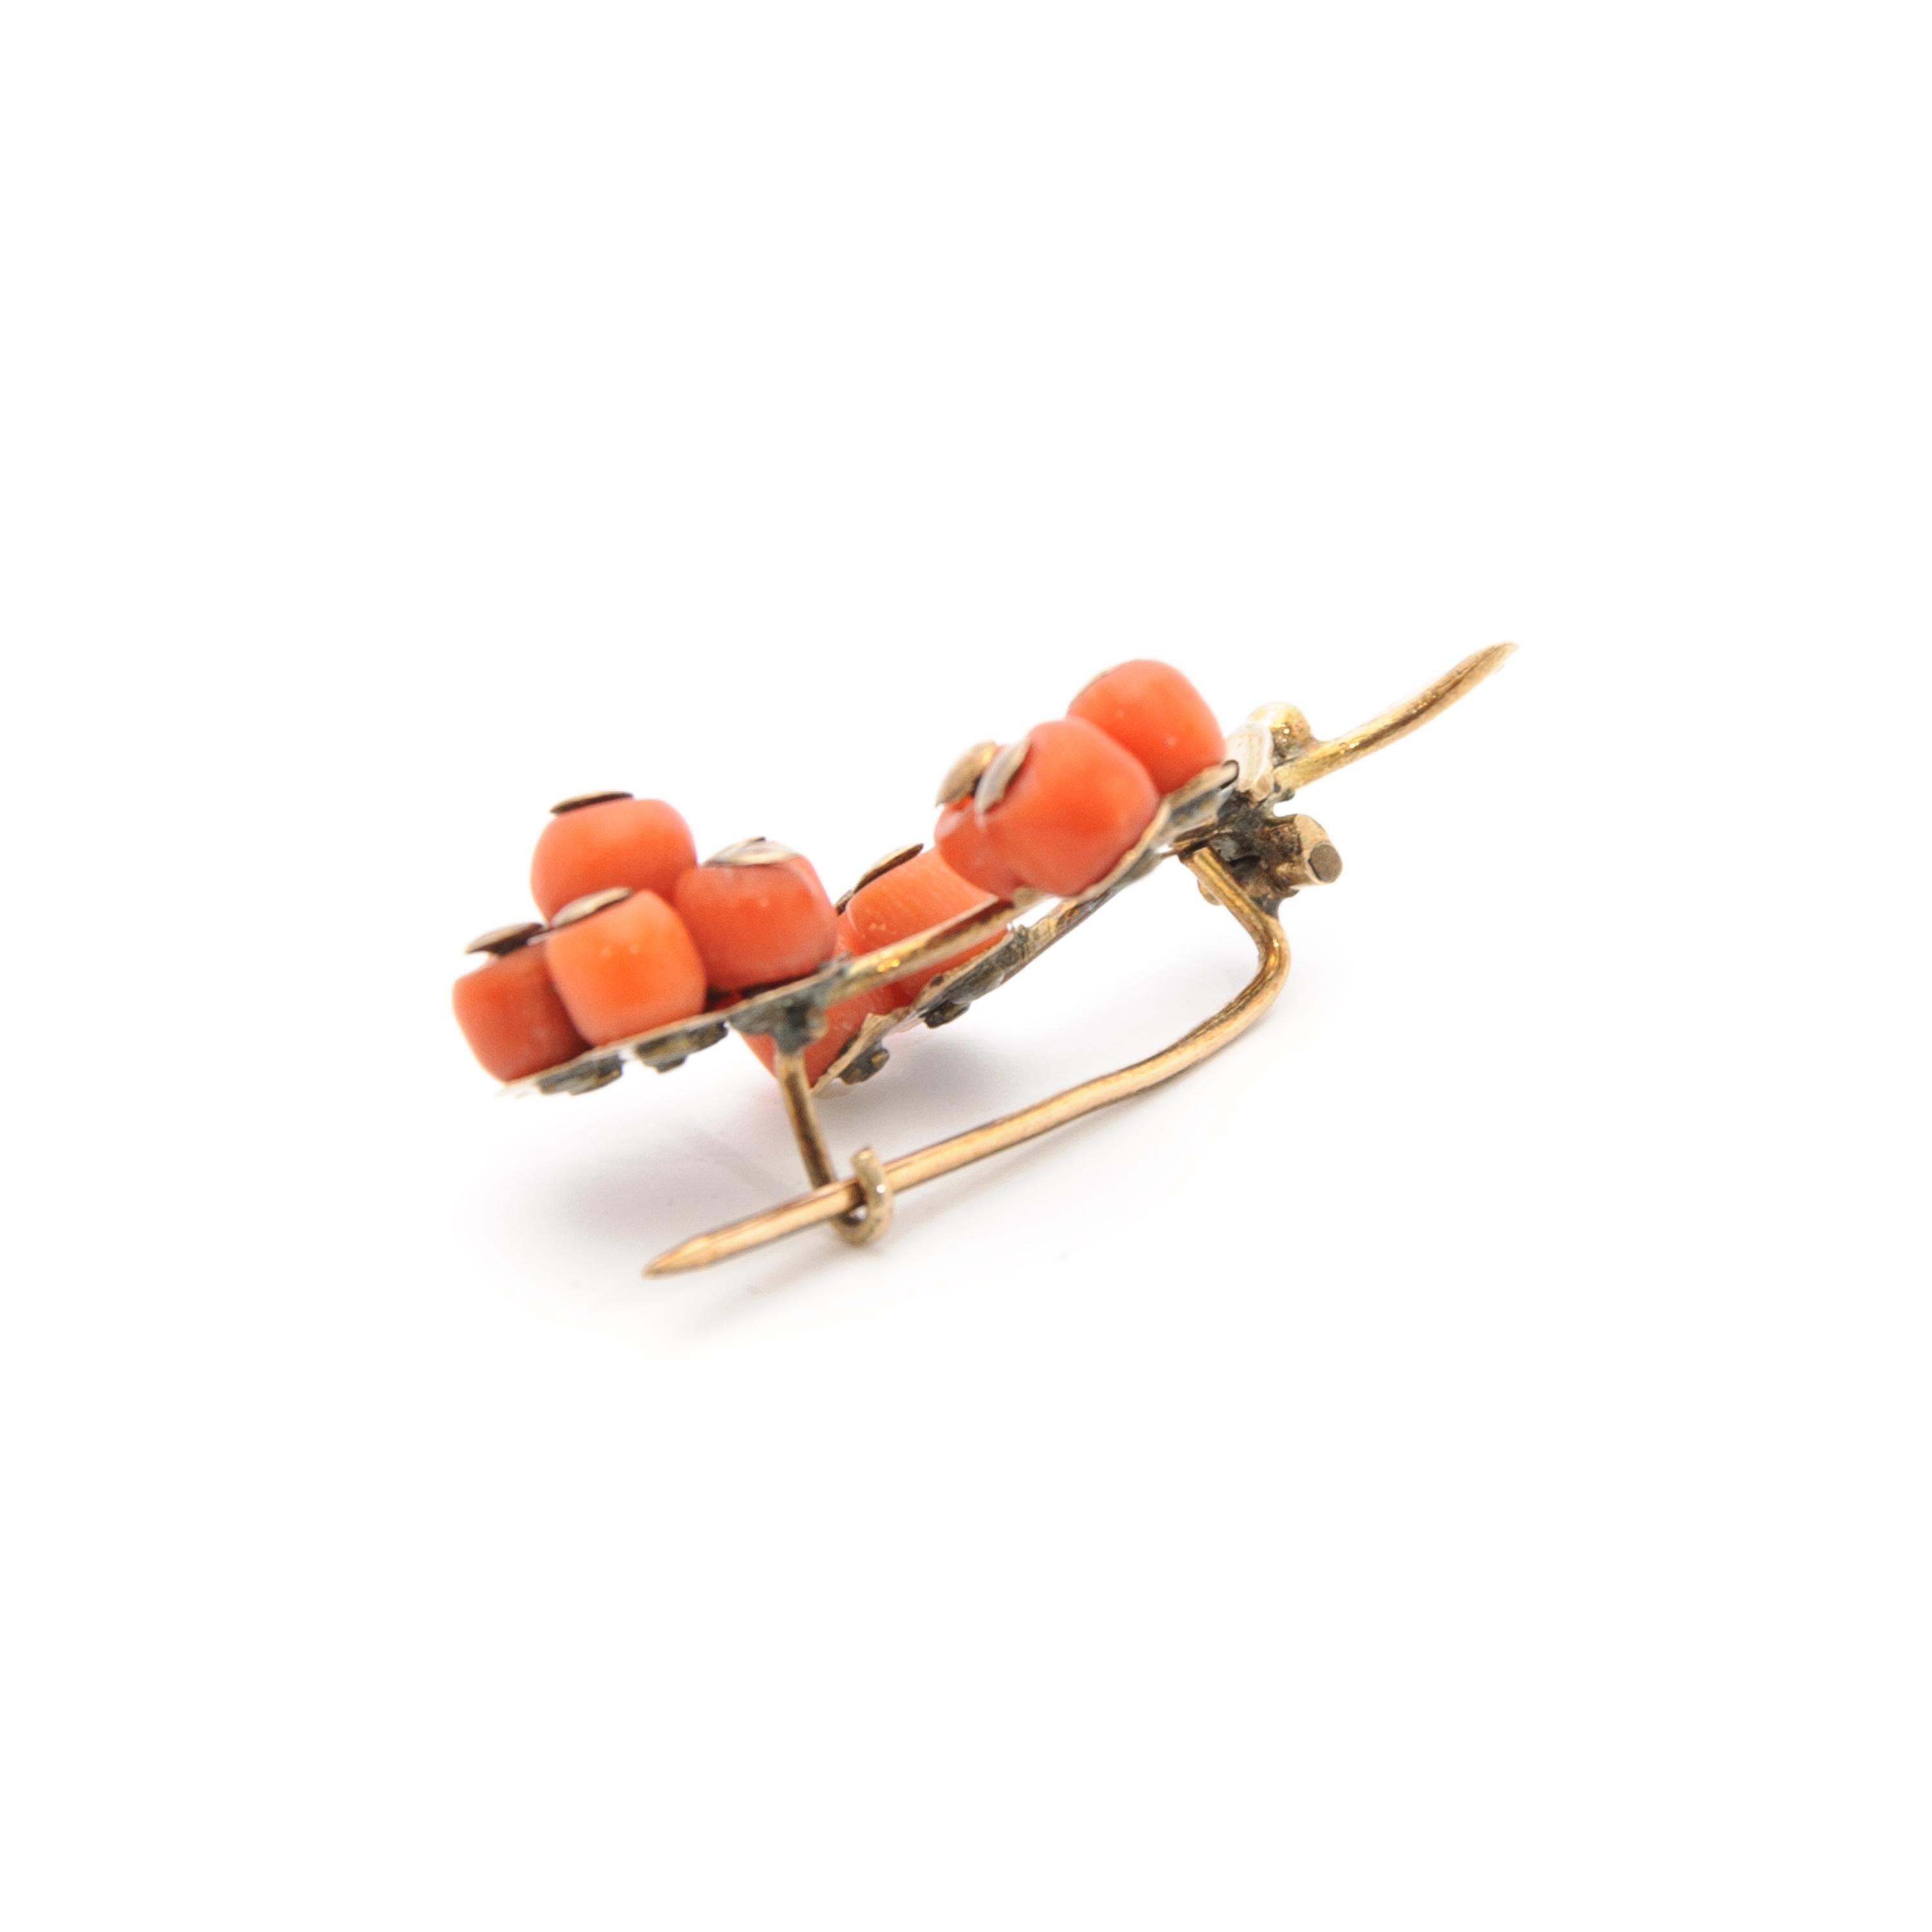 A vintage brooch composed of several small round beaded pieces of red, natural coral. It features a beautiful bouquet of thirteen red corals set on branches of gold. Each barrel-shaped coral bead has a gold cap on top to hold the bead at it's place.